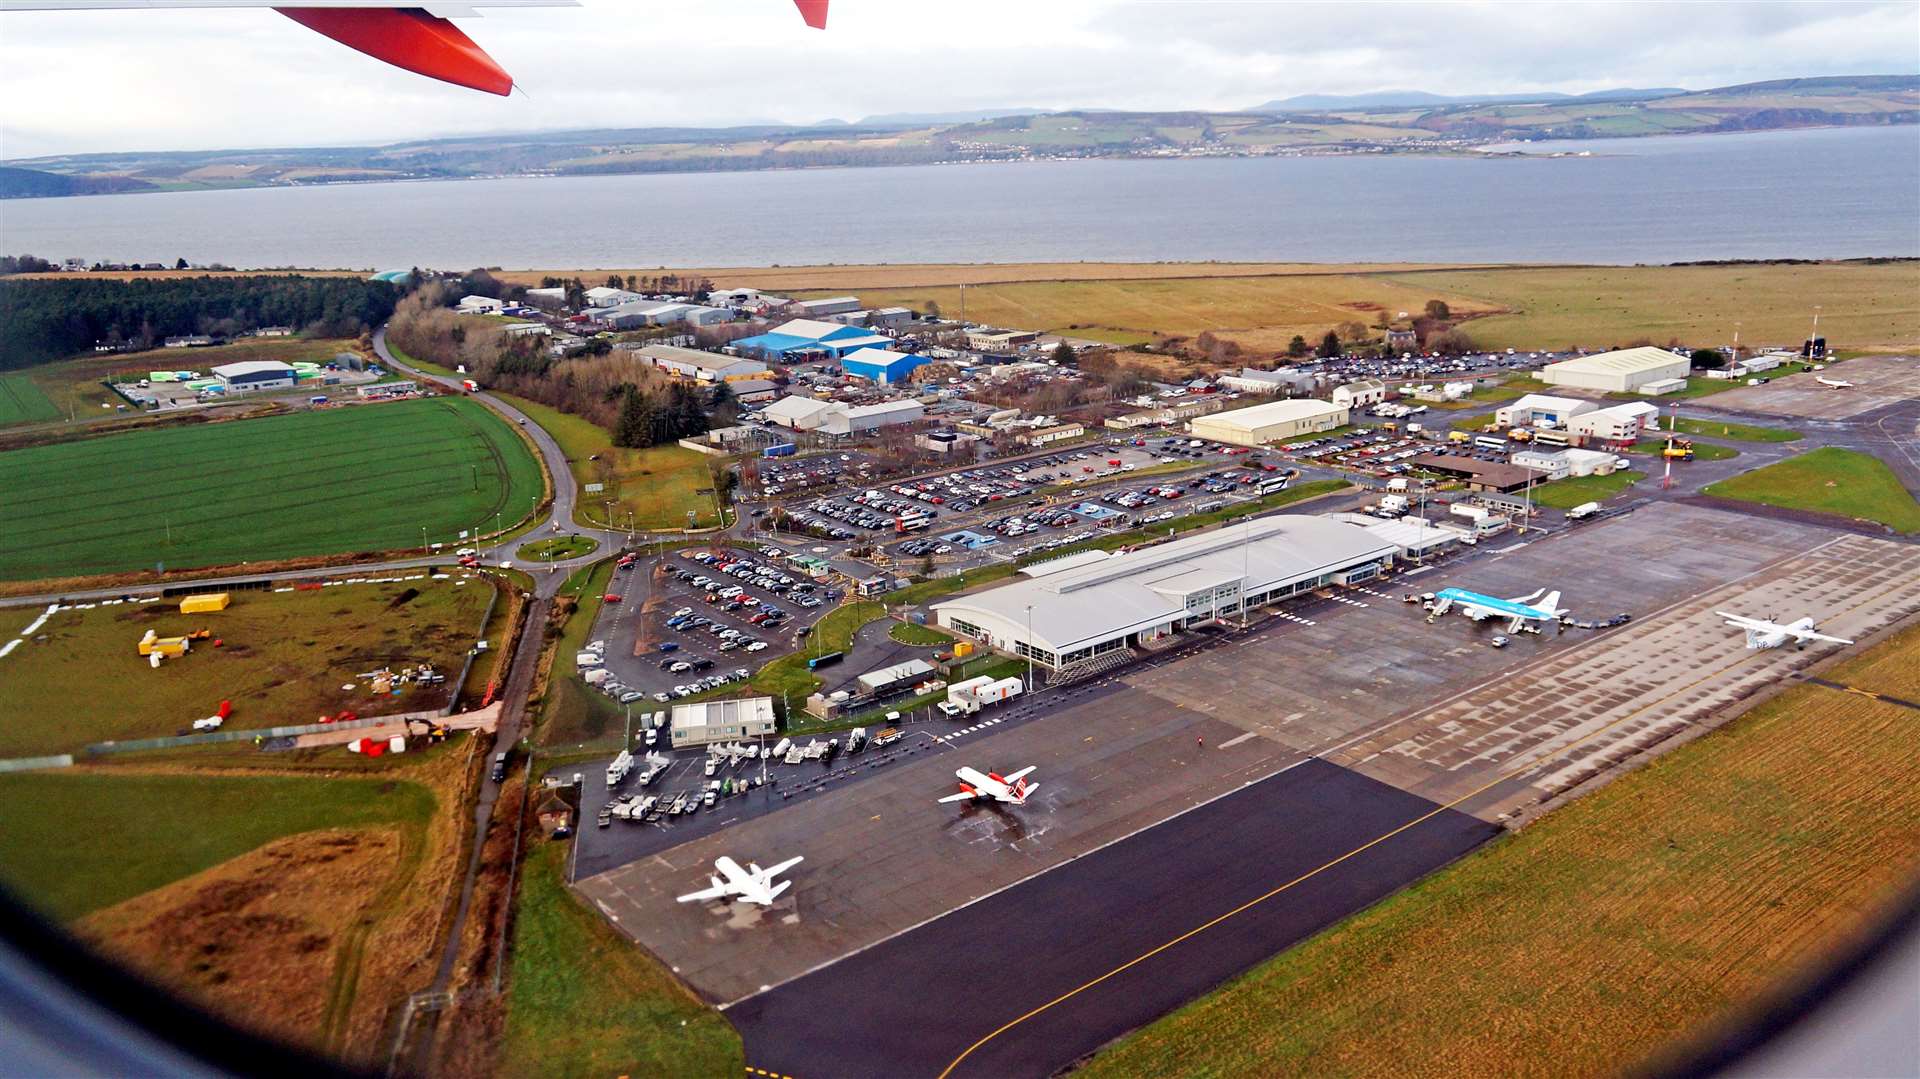 Operations at Inverness Airport were affected by the dispute.